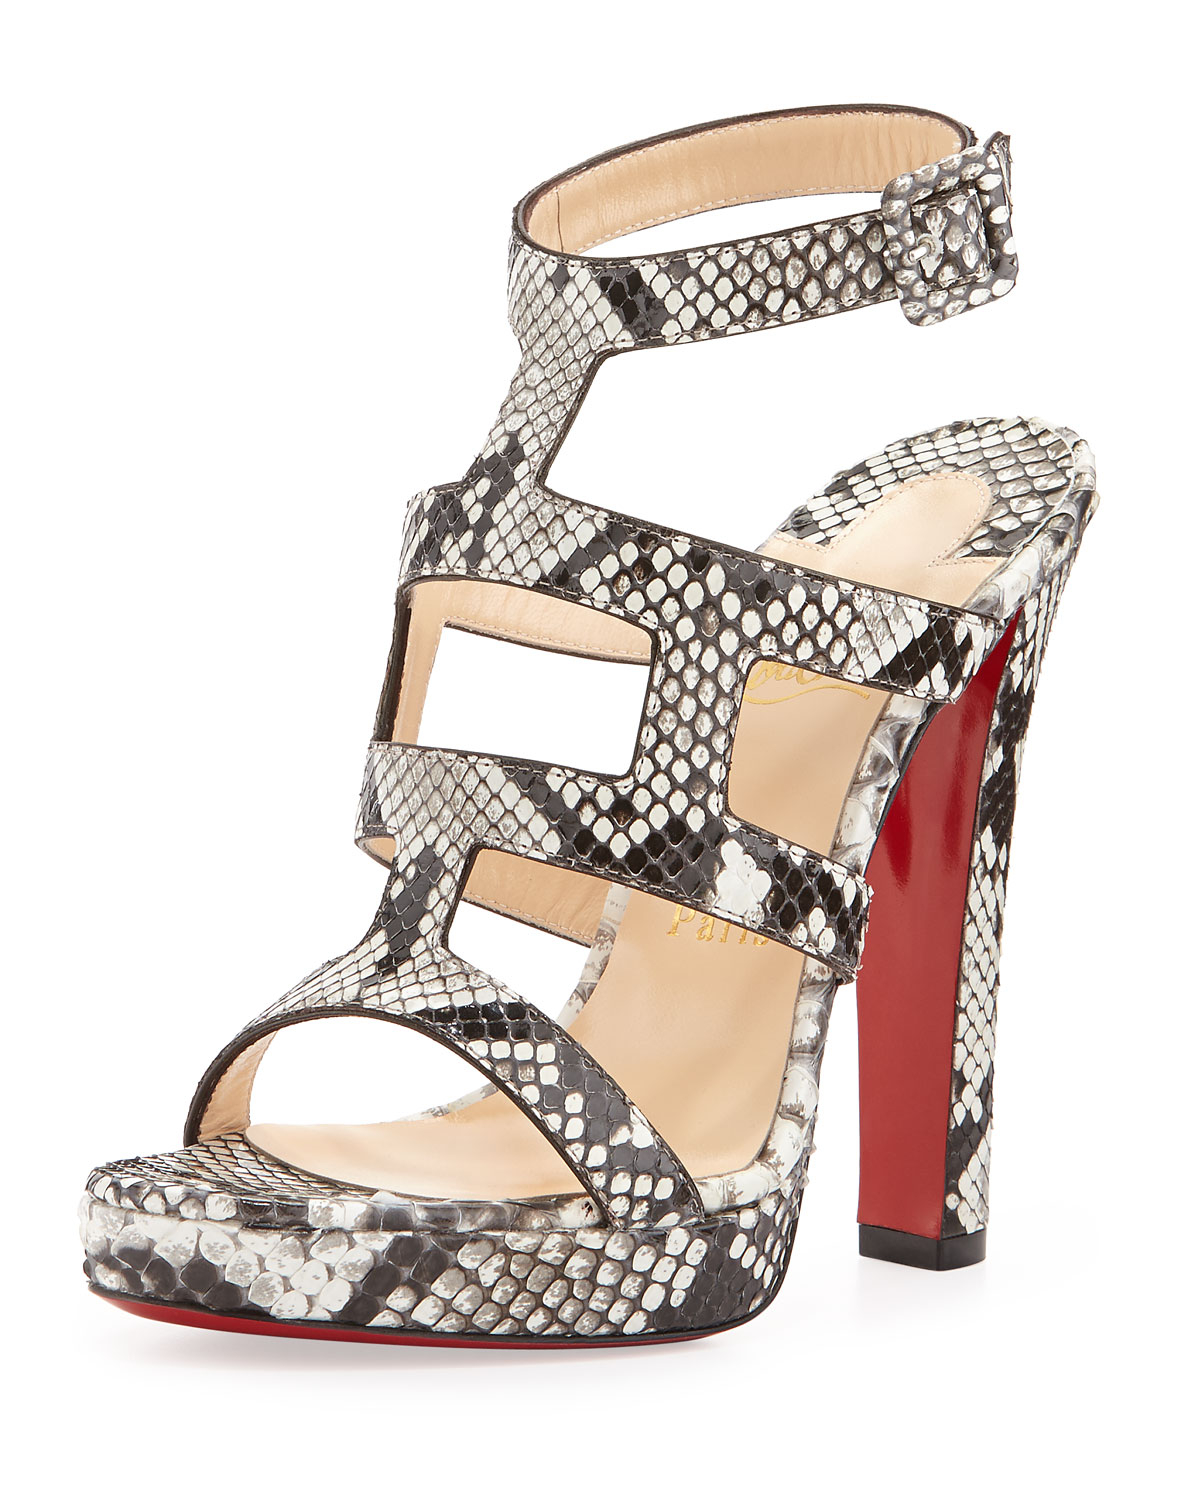 red spiked shoes - christian louboutin python sandals Grey and white wedge heels ...